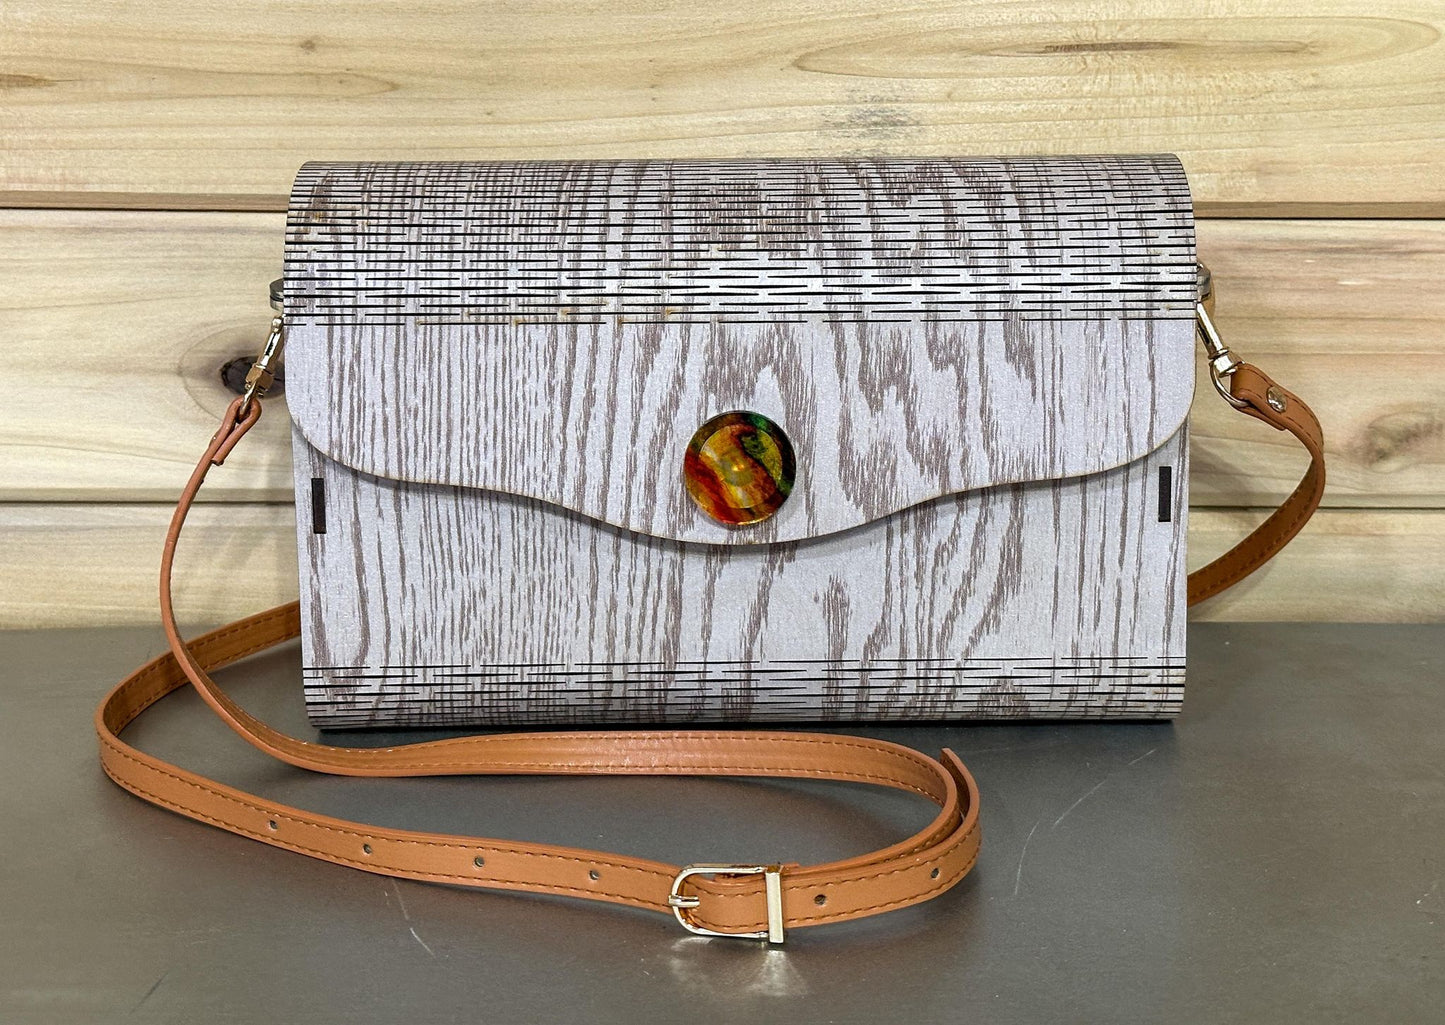 Faux Oak Grain Wooden Clutch Purse - Great for a special occasion!